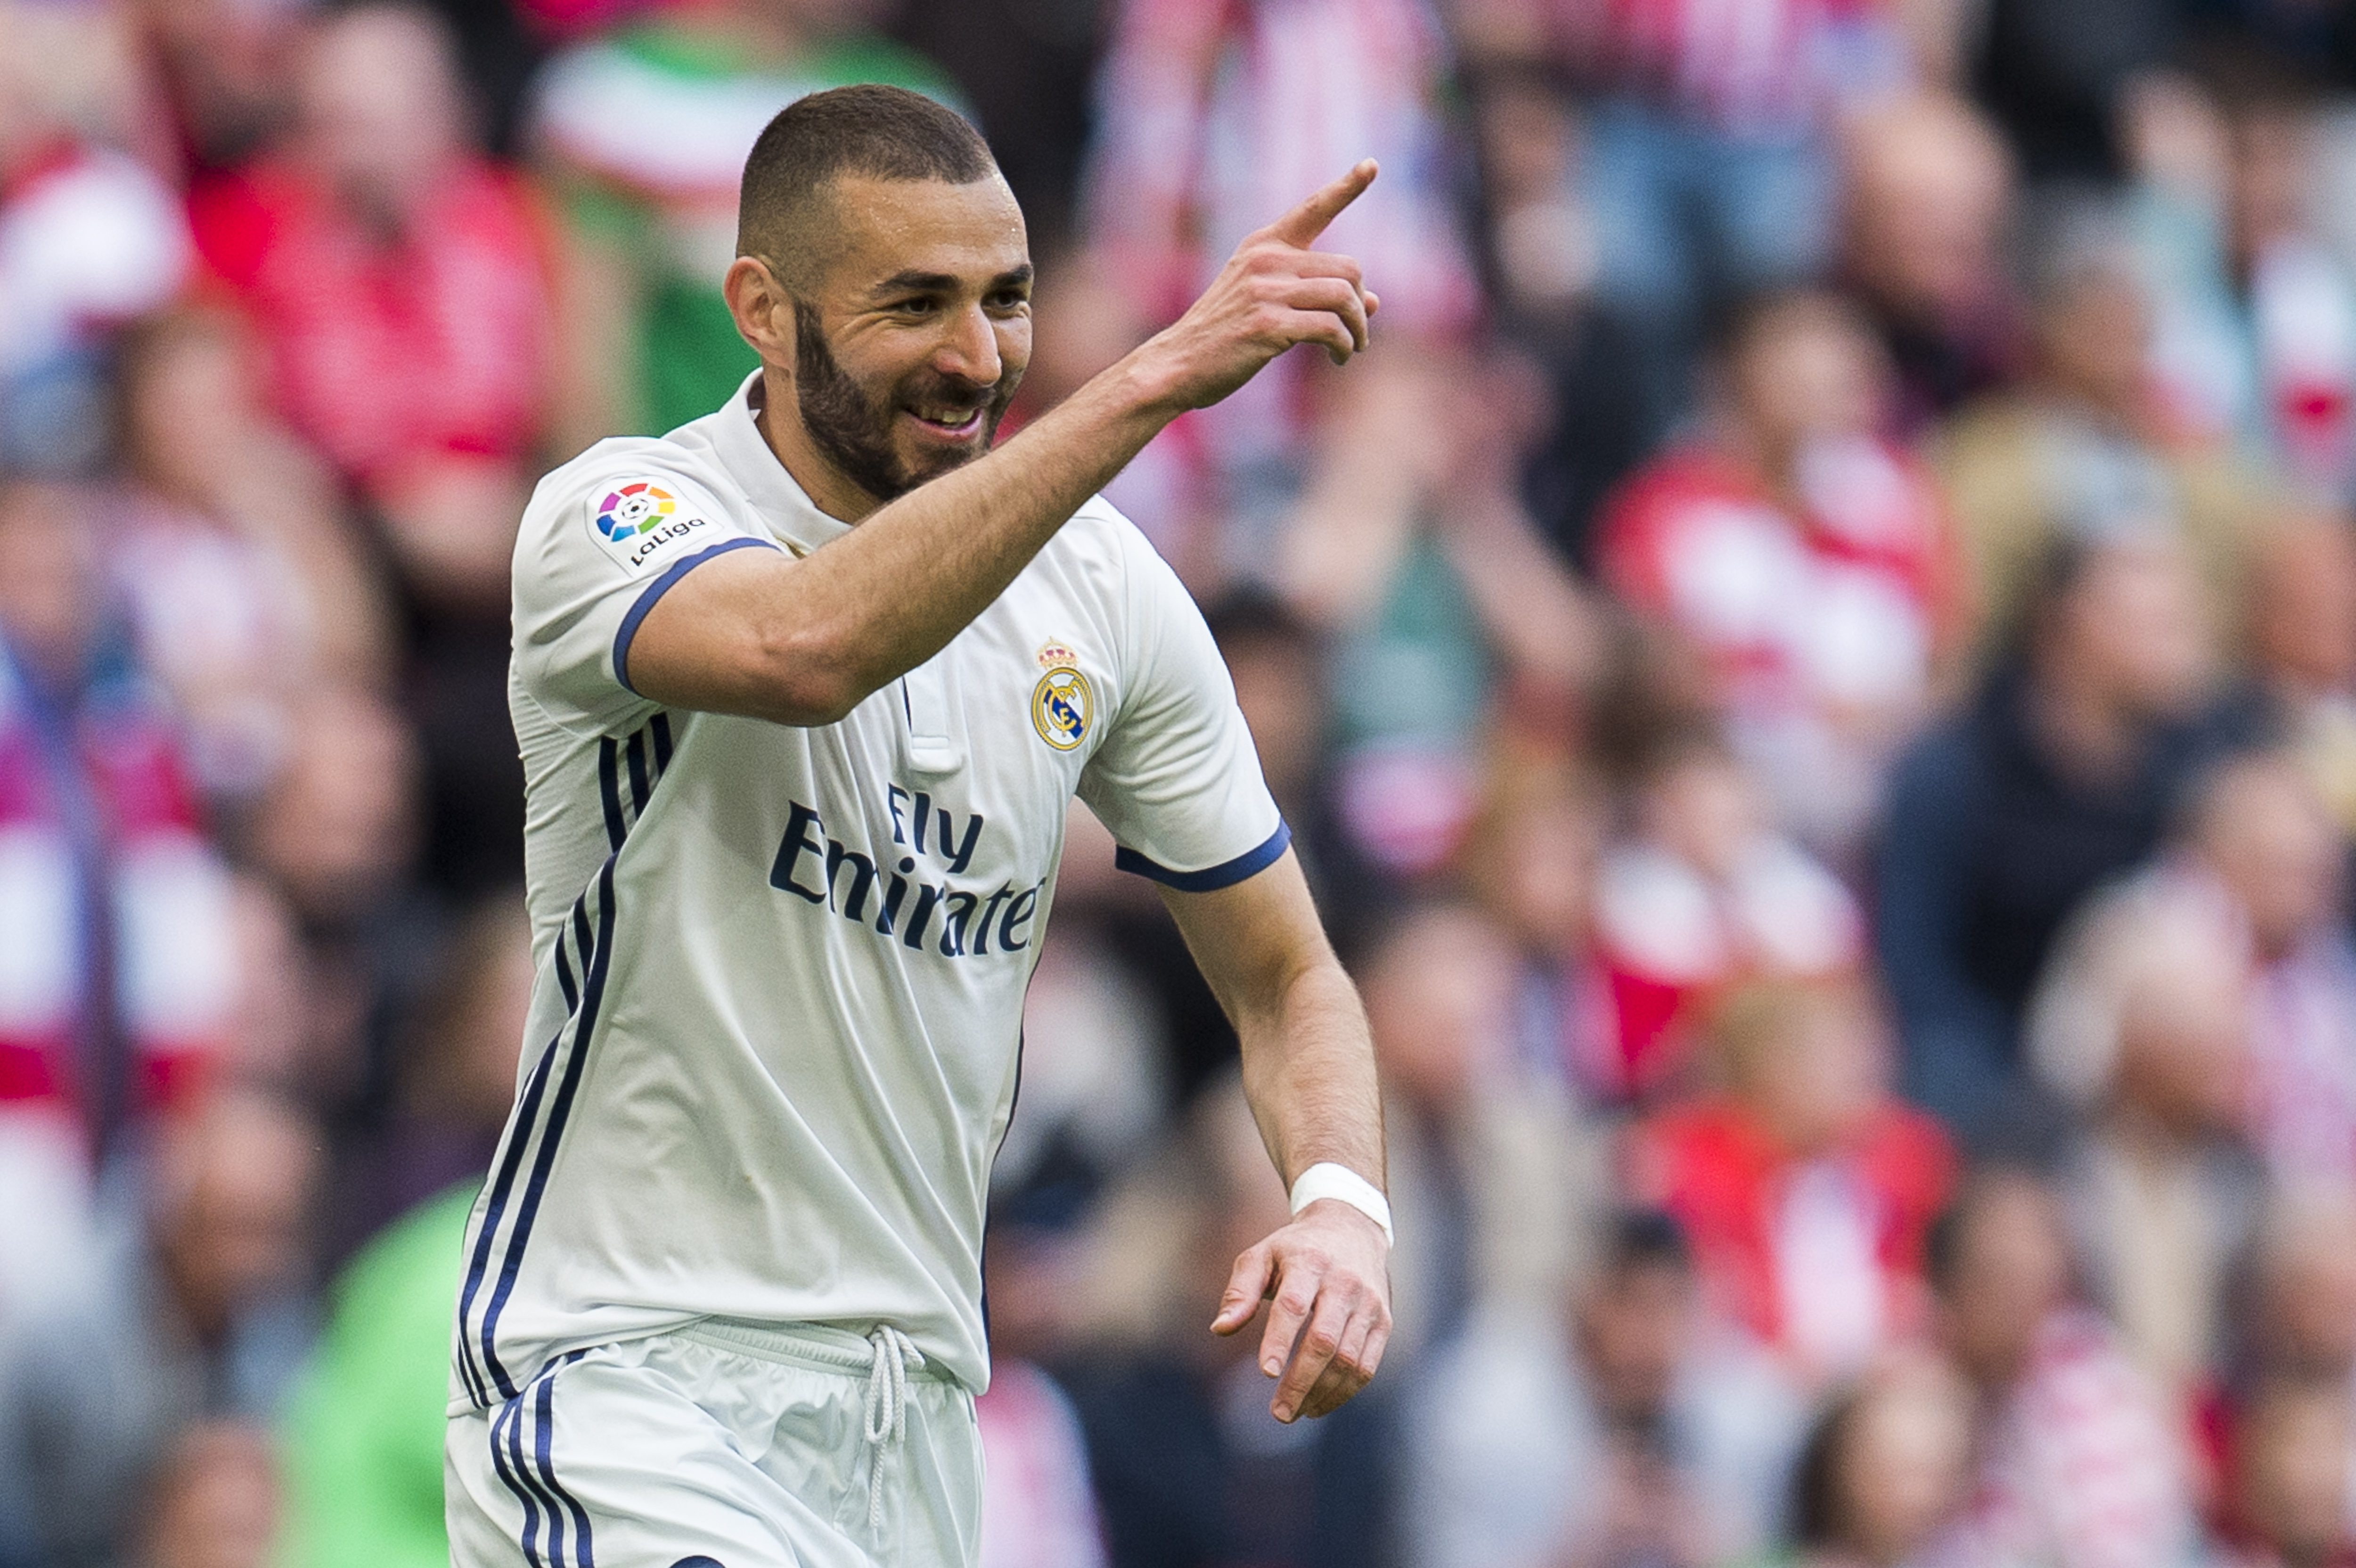 Real Madrid Striker Karim Benzema In Doubt For Champions League Clash Against Inter, Italian Media Report